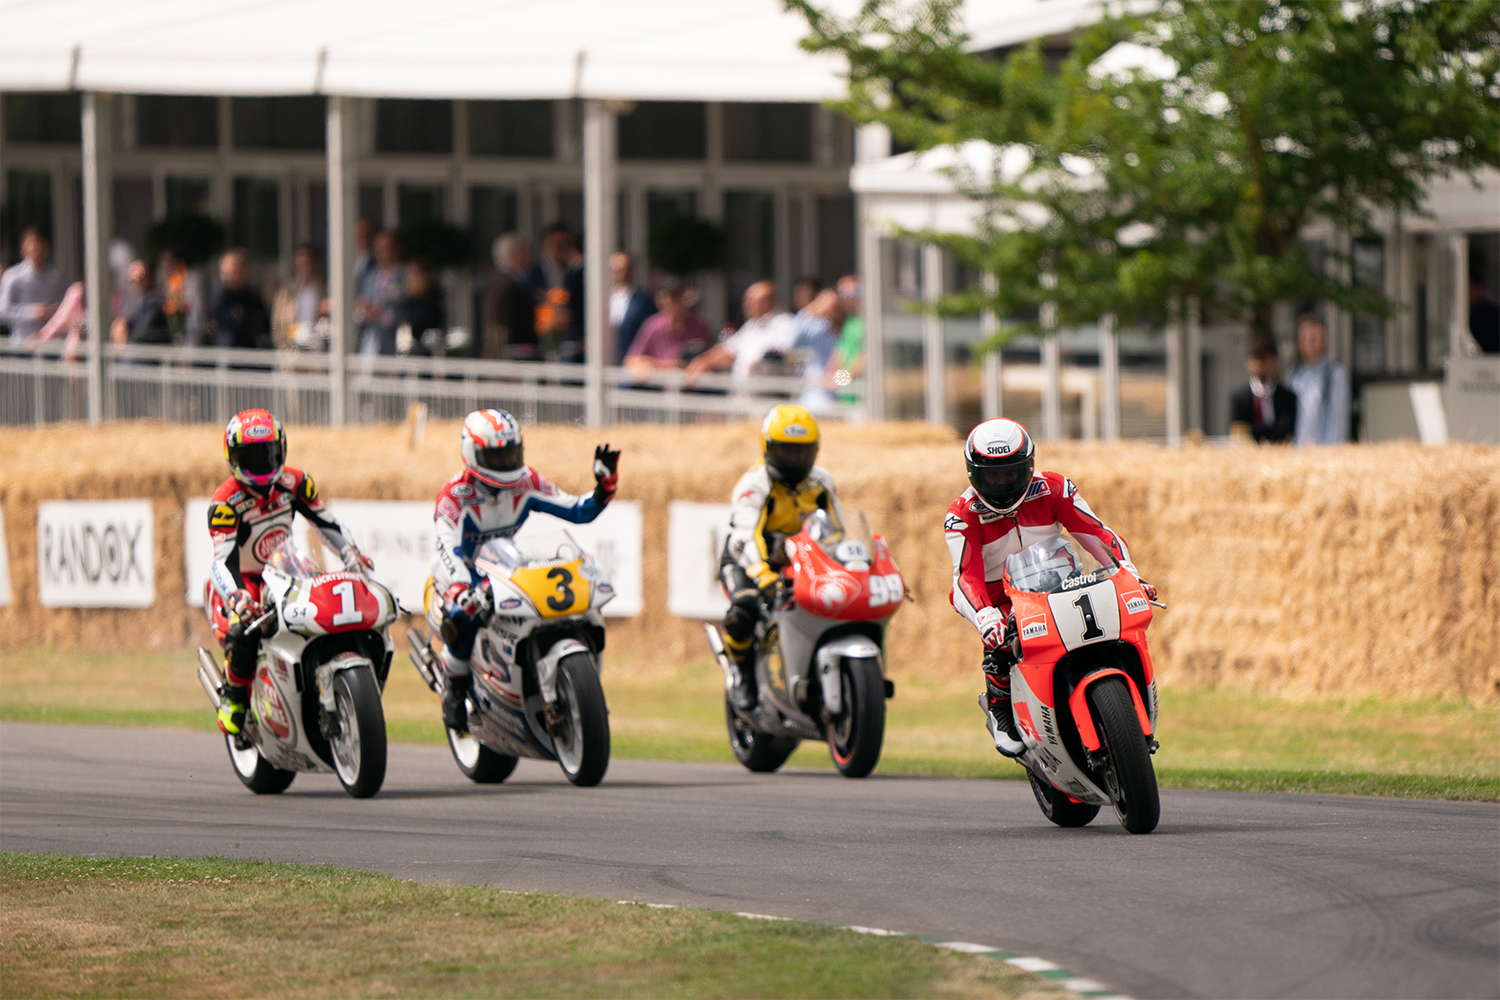 Wayne Rainey, who was paralyzed in 1993 during the height of his motorcycle racing career, rides at the front of a four-person pack at the 2022 Goodwood Festival of Speed